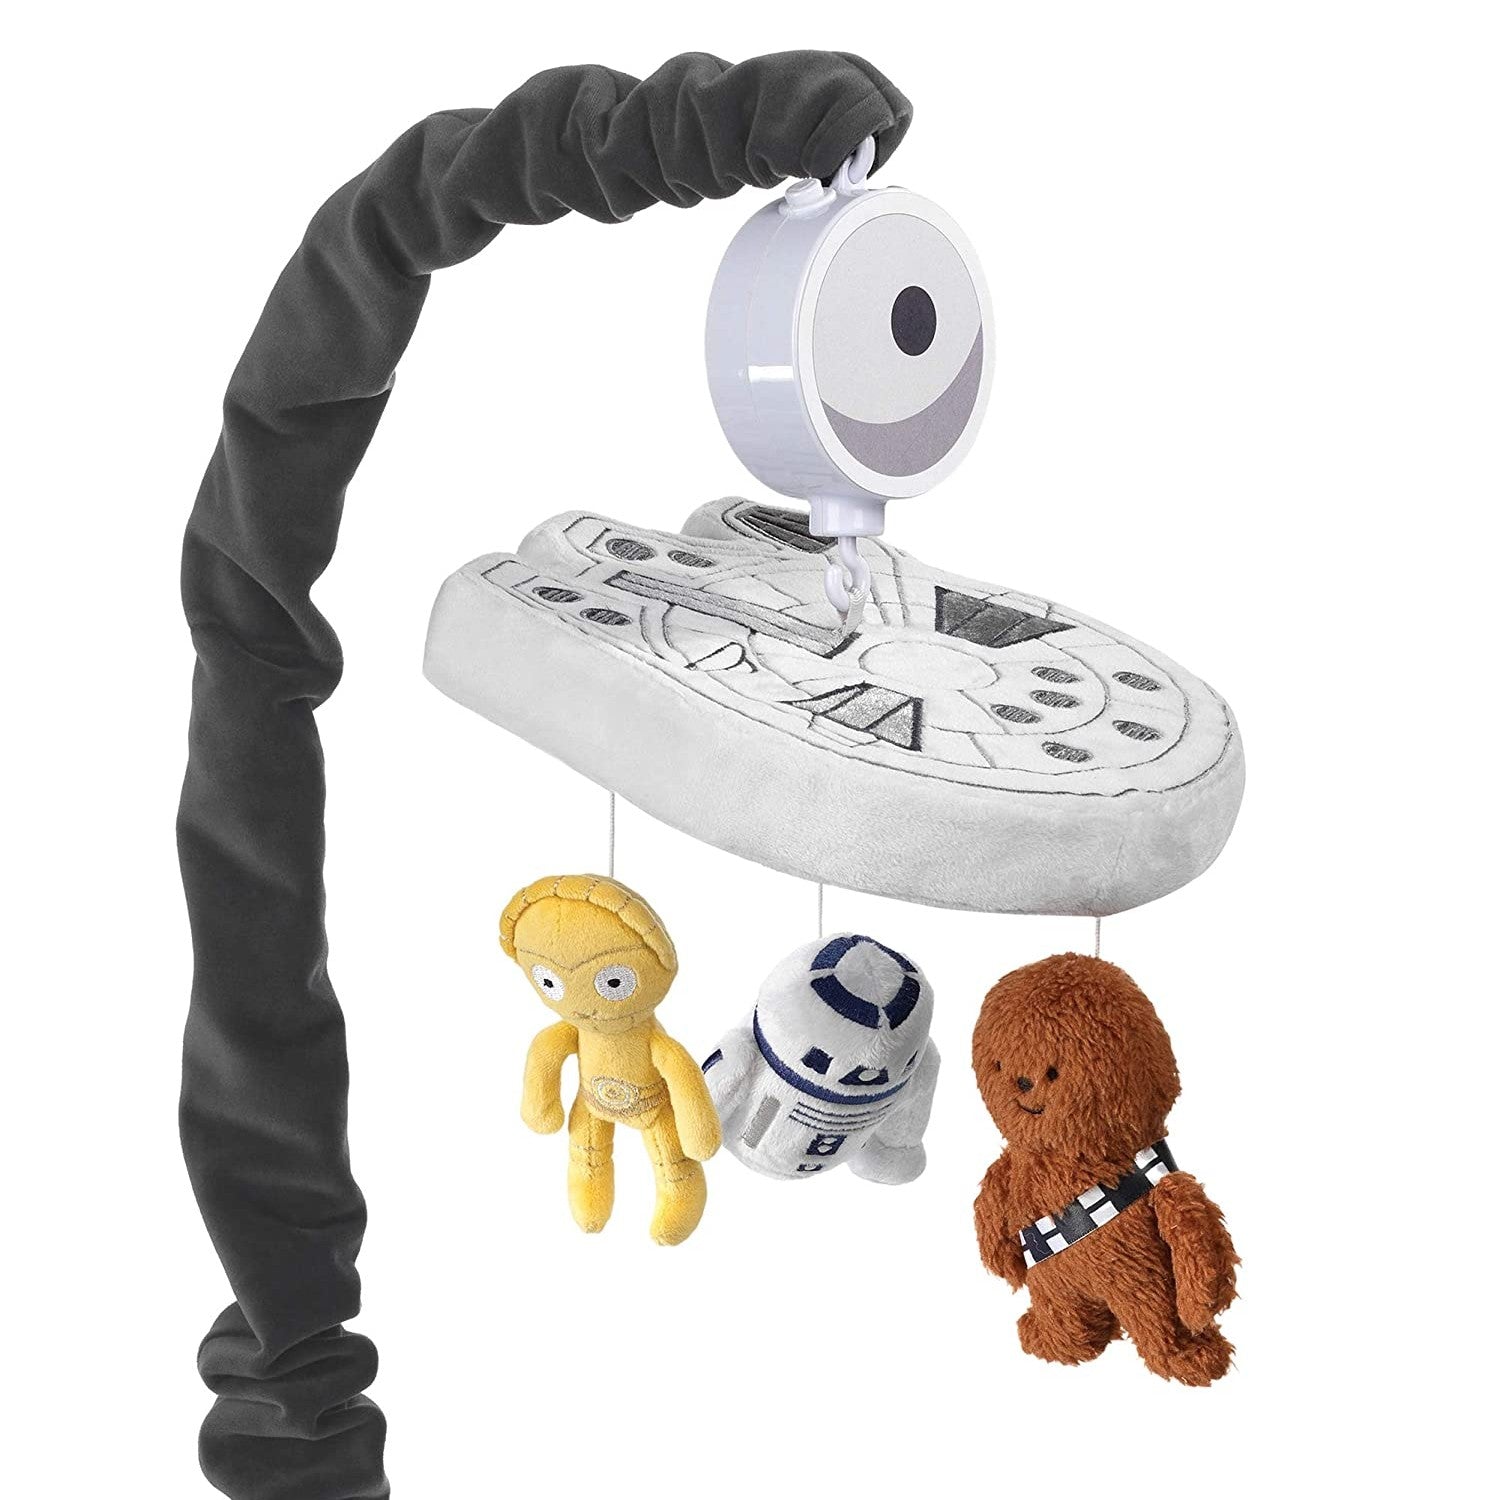 A Star Wars baby crib mobile featuring a spaceship, C3PO, RS-D2 and Chewbacca.